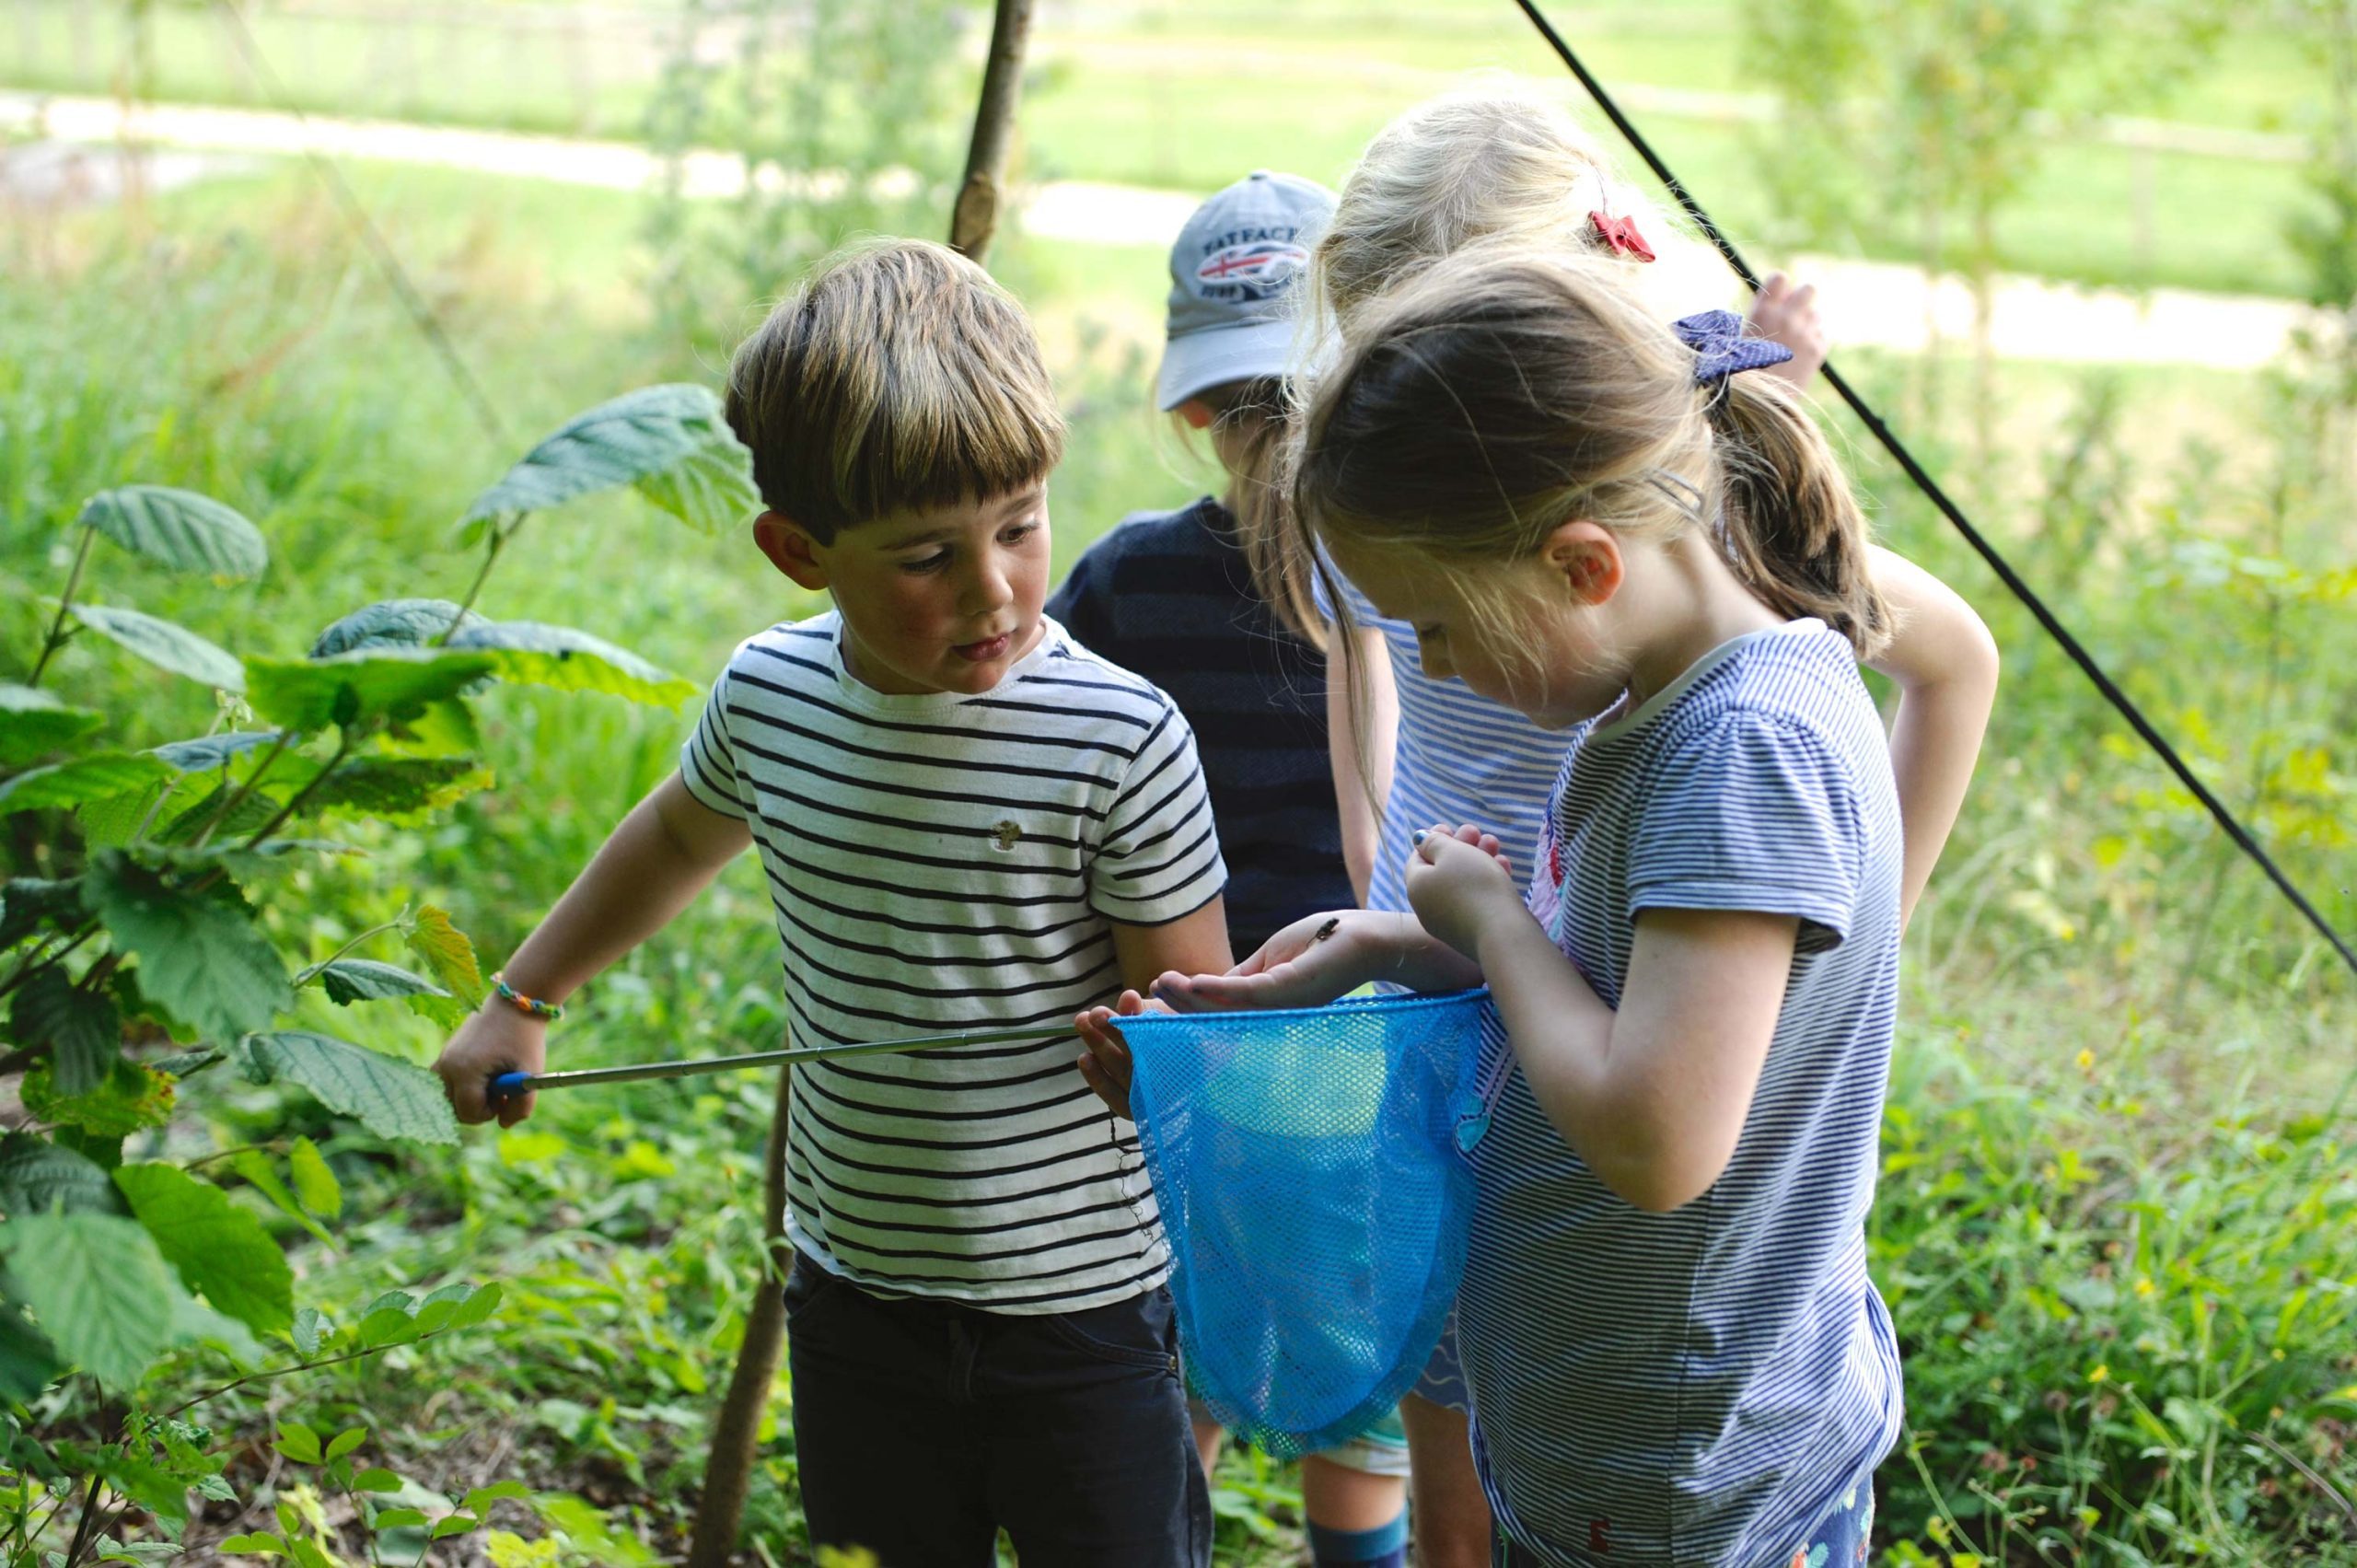 A group of children discovering insects with butterfly nets in the wild areas of Loose Reins